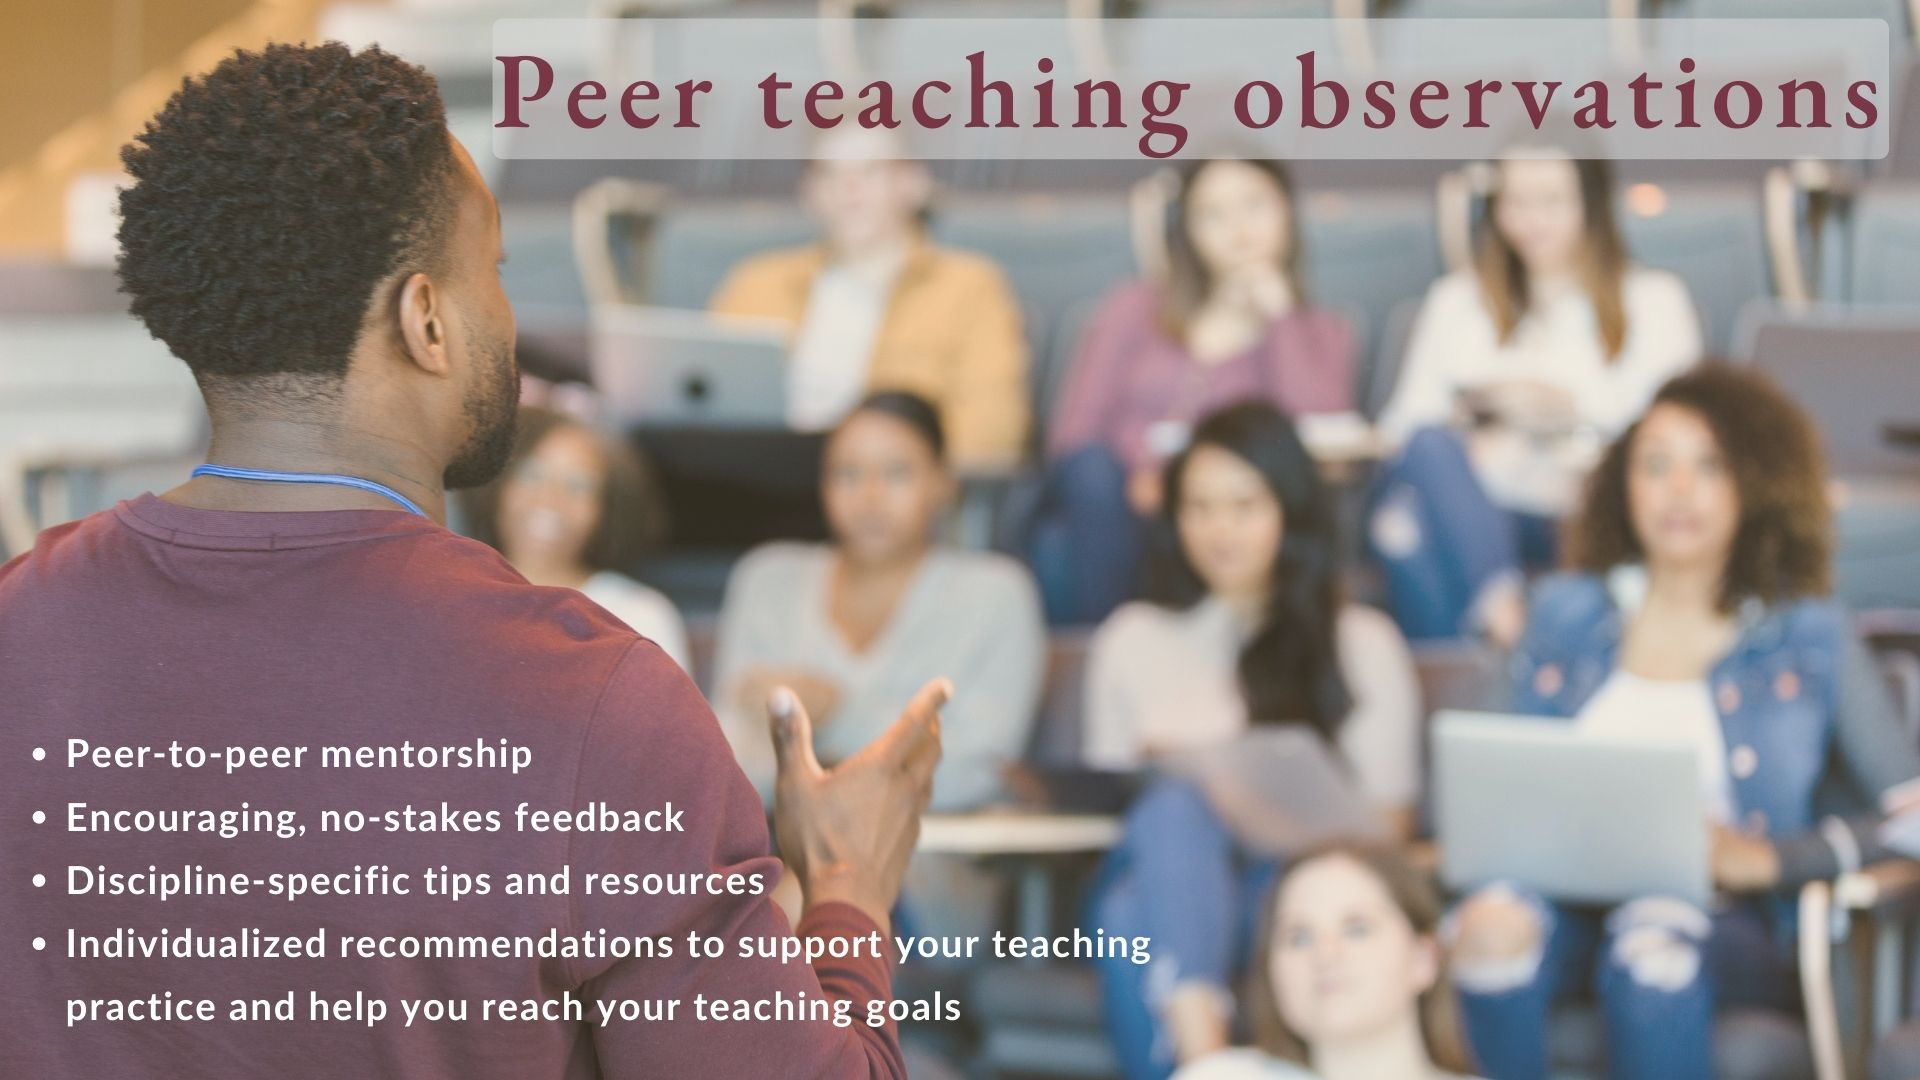 Teaching Assistant addressing a lecture hall of college students with the heading “Peer teaching observations” and four bullet points: “Peer-to-peer mentorship; Encouraging, no-stakes feedback; Discipline-specific resources; Individualized recommendations to support your teaching practice”